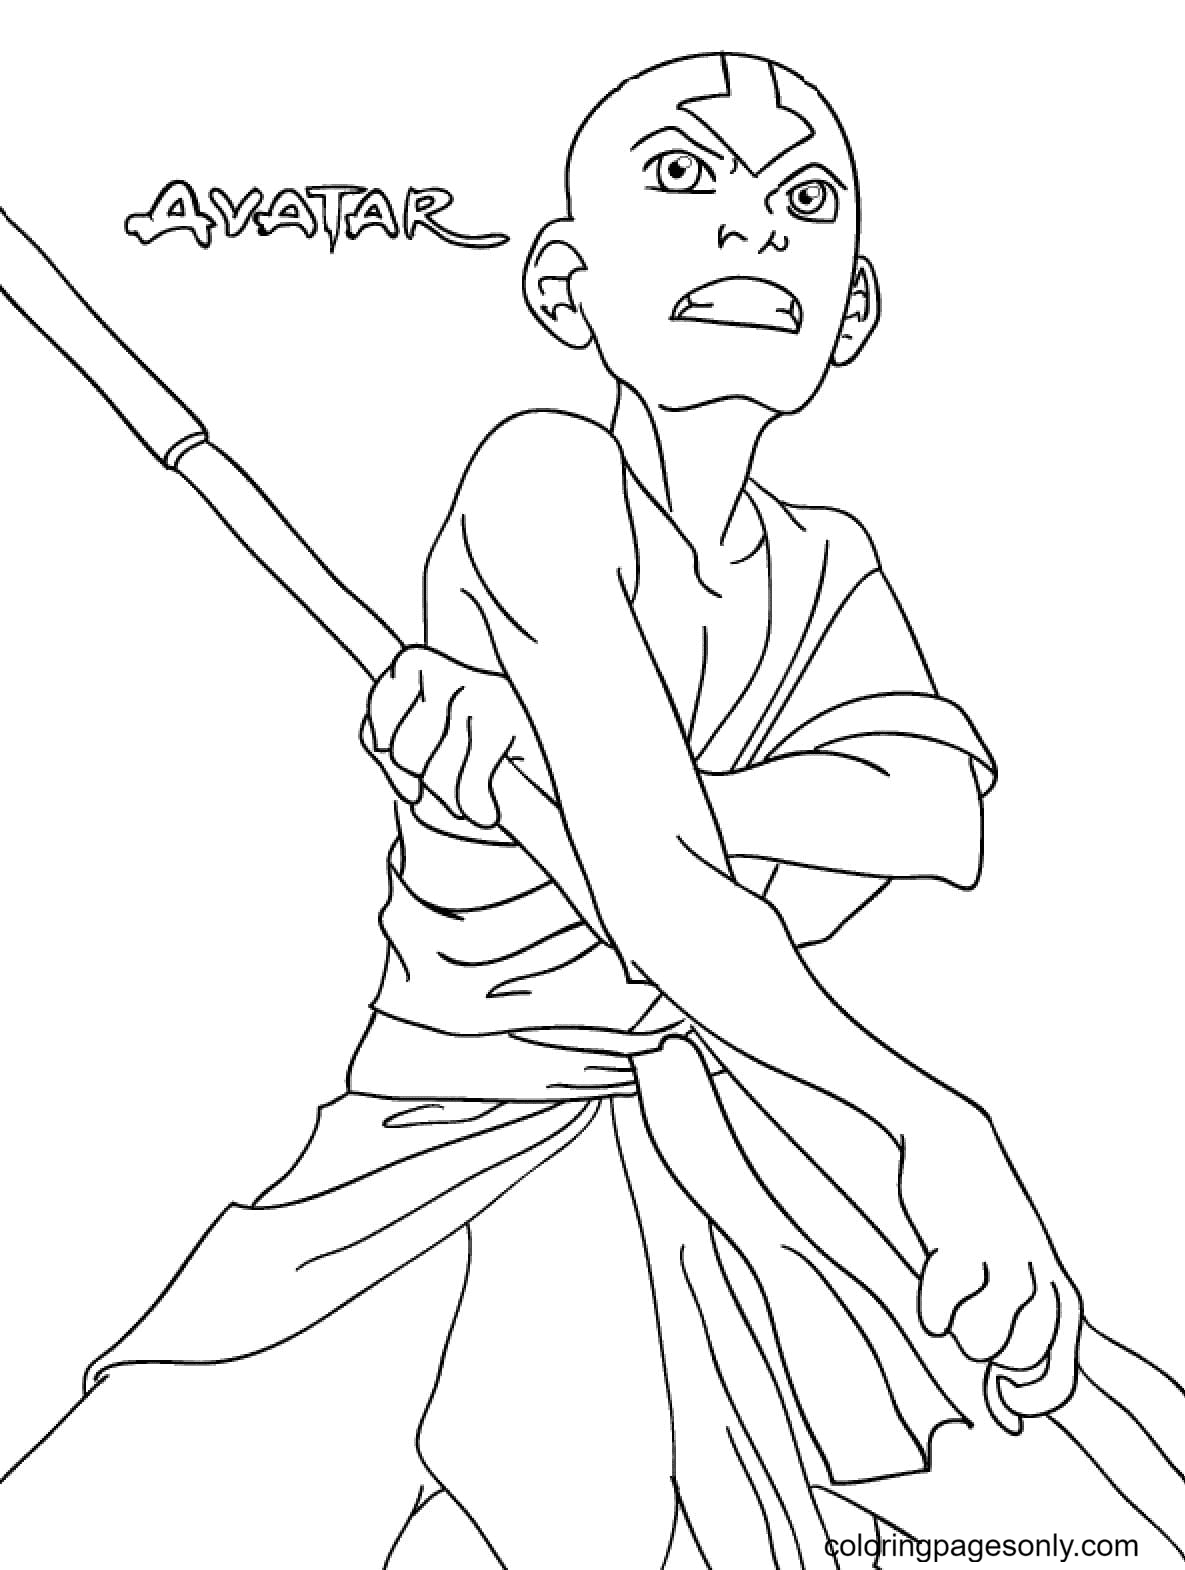 Aang from Avatar Coloring Pages